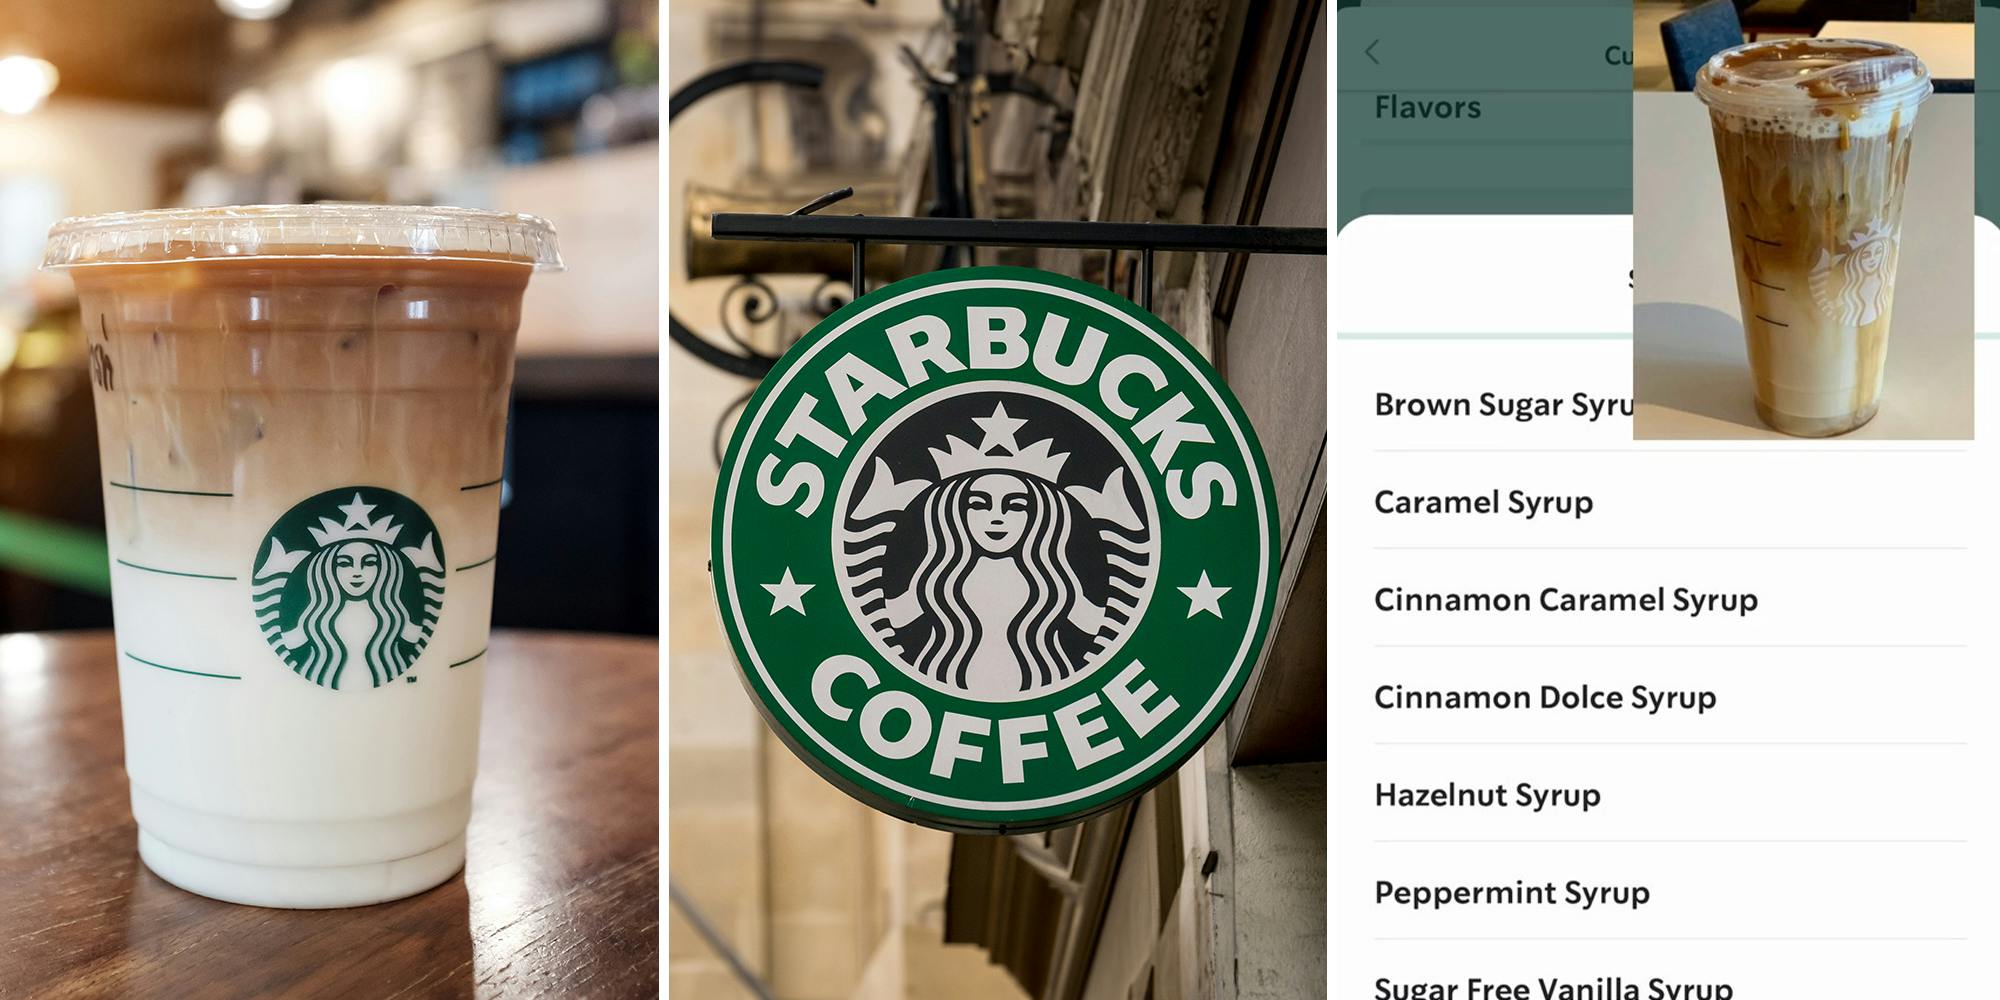 Customer shares hack to getting $3.35 venti espresso drink from Starbucks